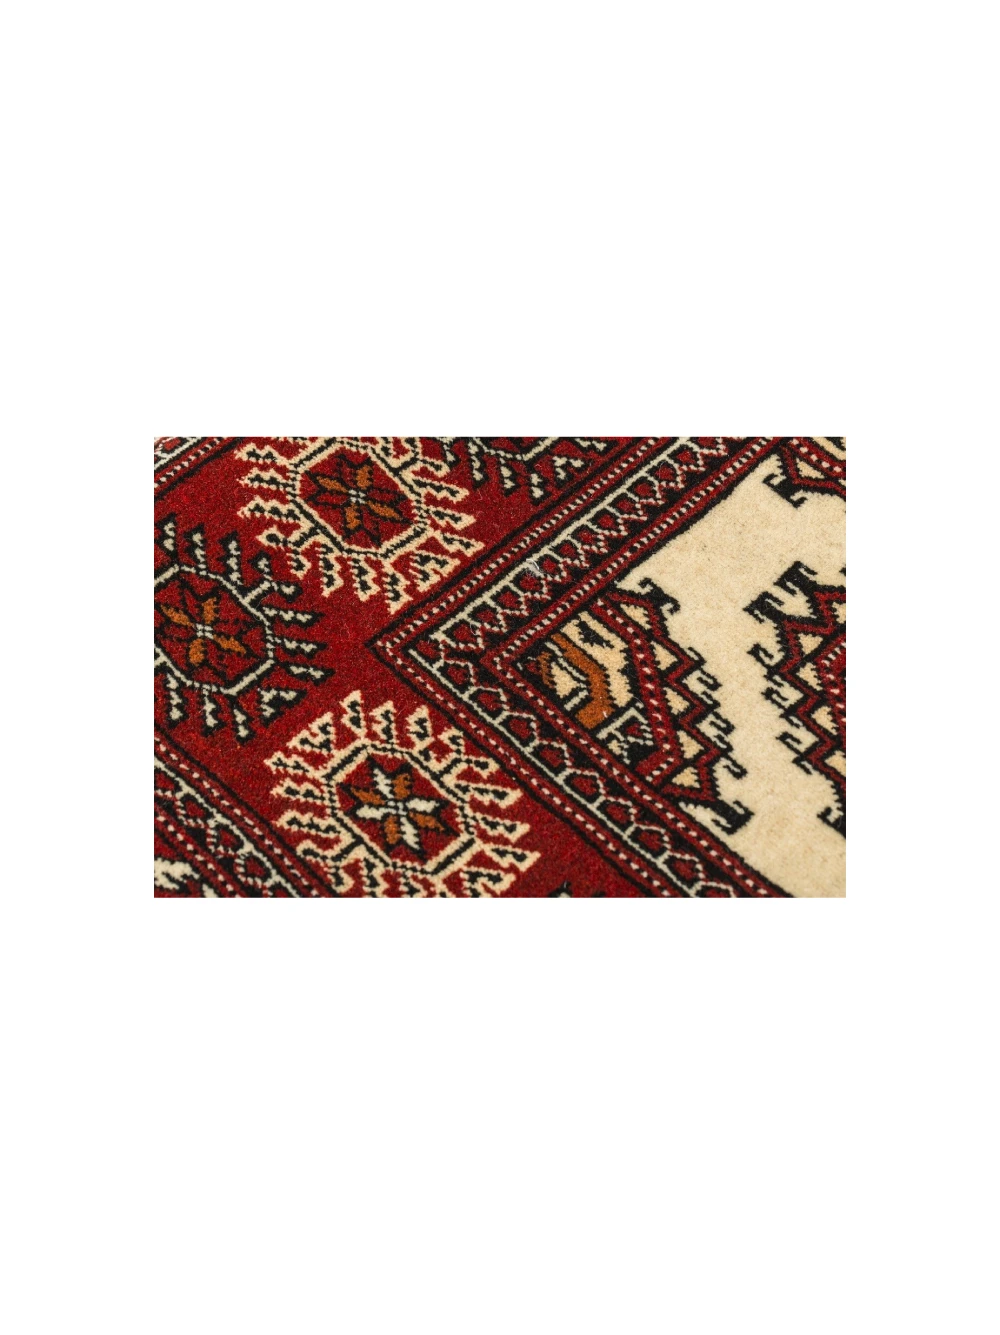 Handmade Cream and Red Persian Turkmen Wool Rug A279